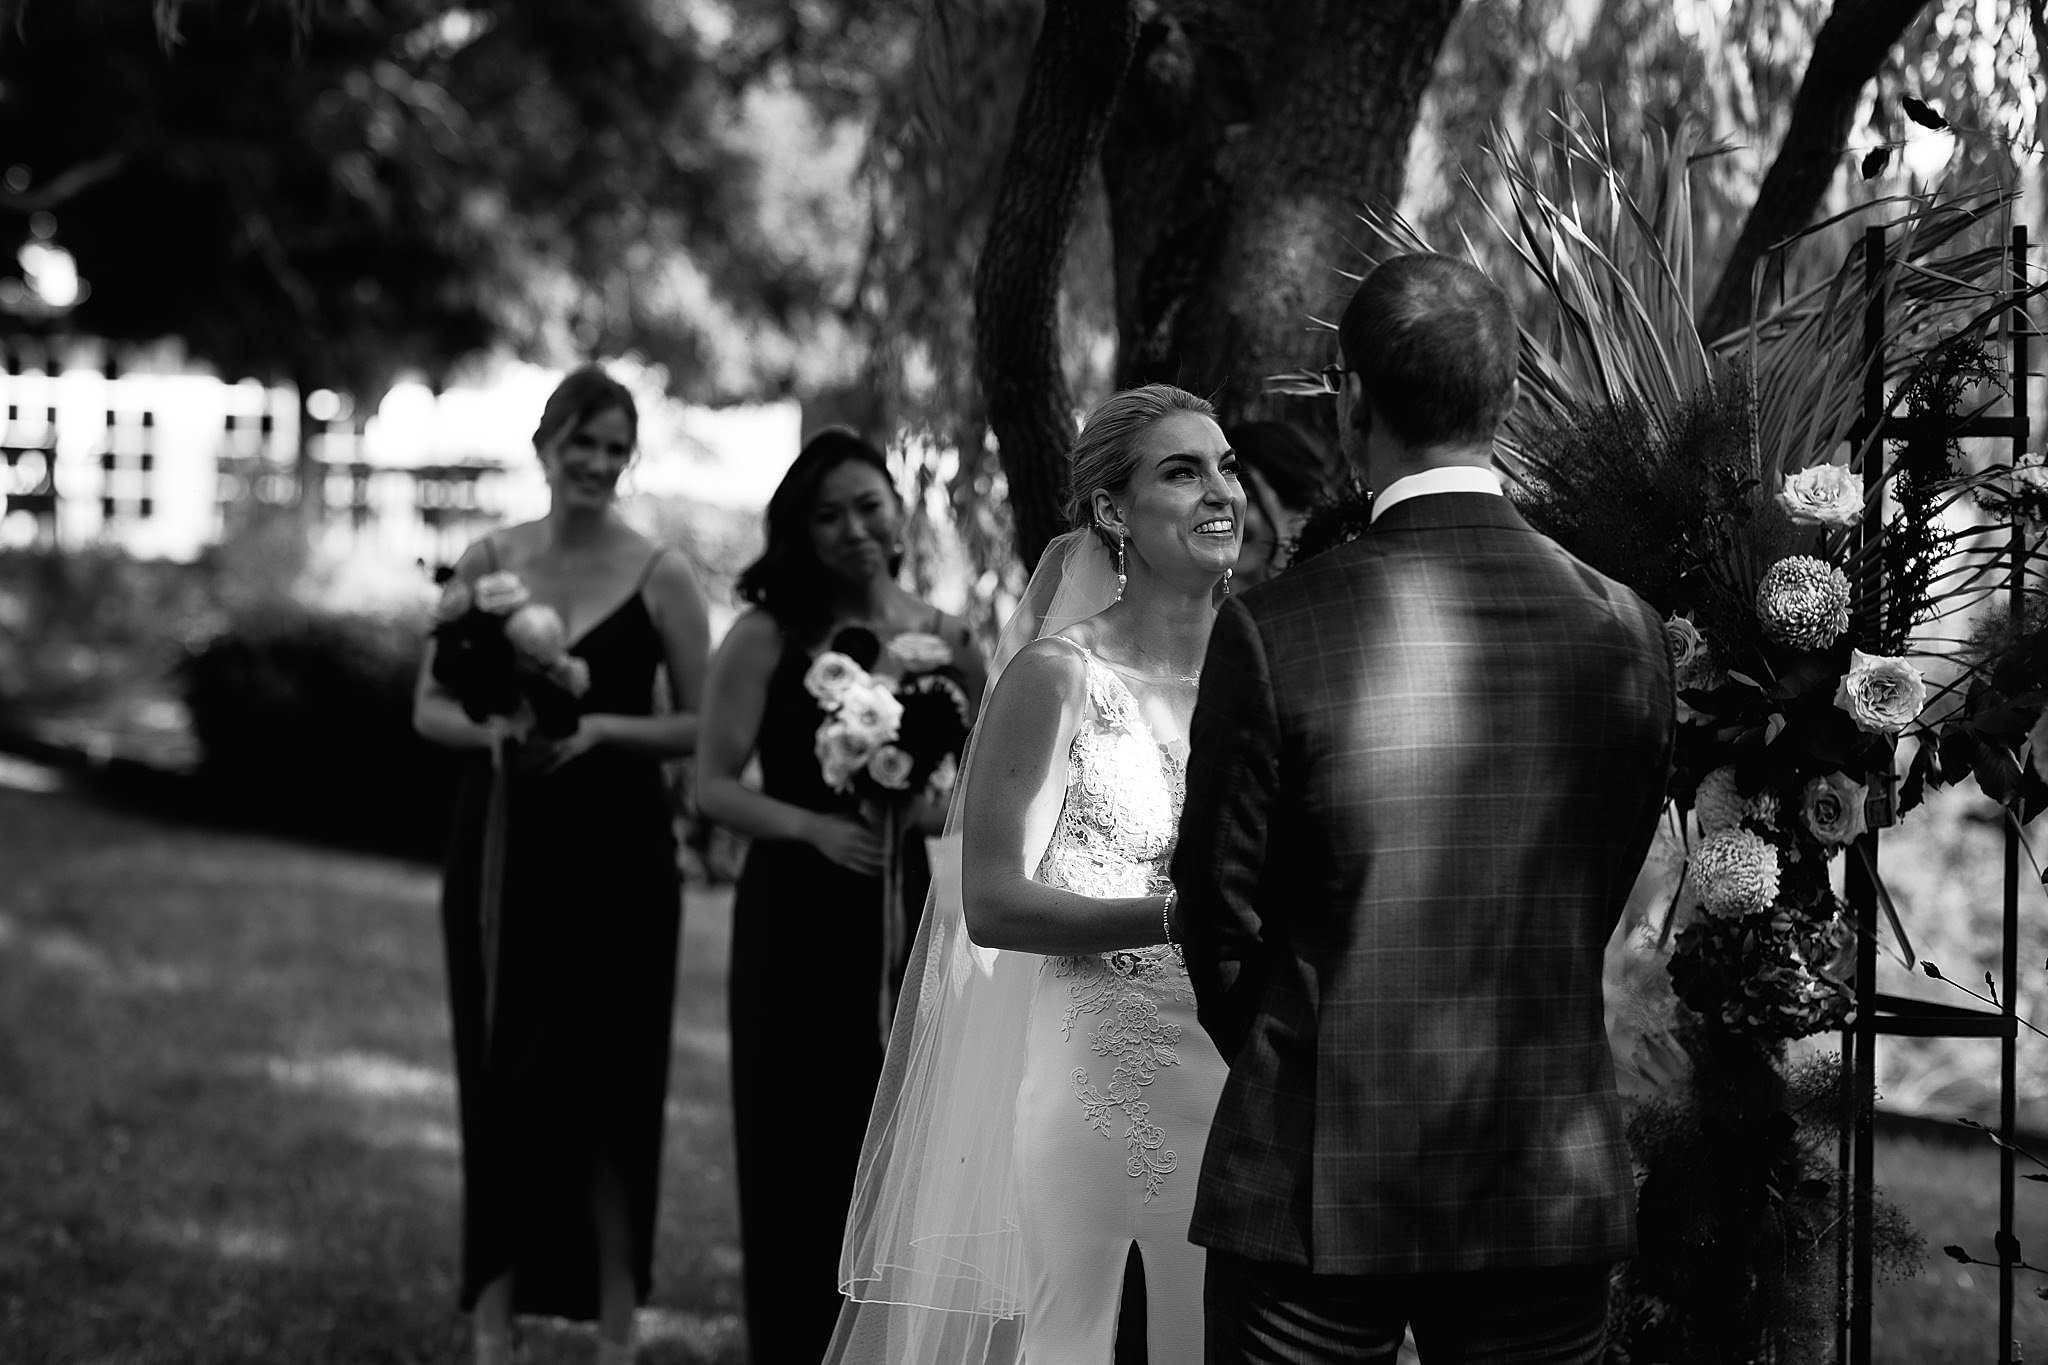 country wedding,Keepsakephoto by the Keeffes,ACT wedding photographer,ACT weddings,Bowral Wedding Photographer,Canberra Wedding Photographer,Canberra Wedding Photography,canberra weddings,Gundaroo,Grazing,Grazing at Gundaroo,Laurel and Lace,canberra florist,